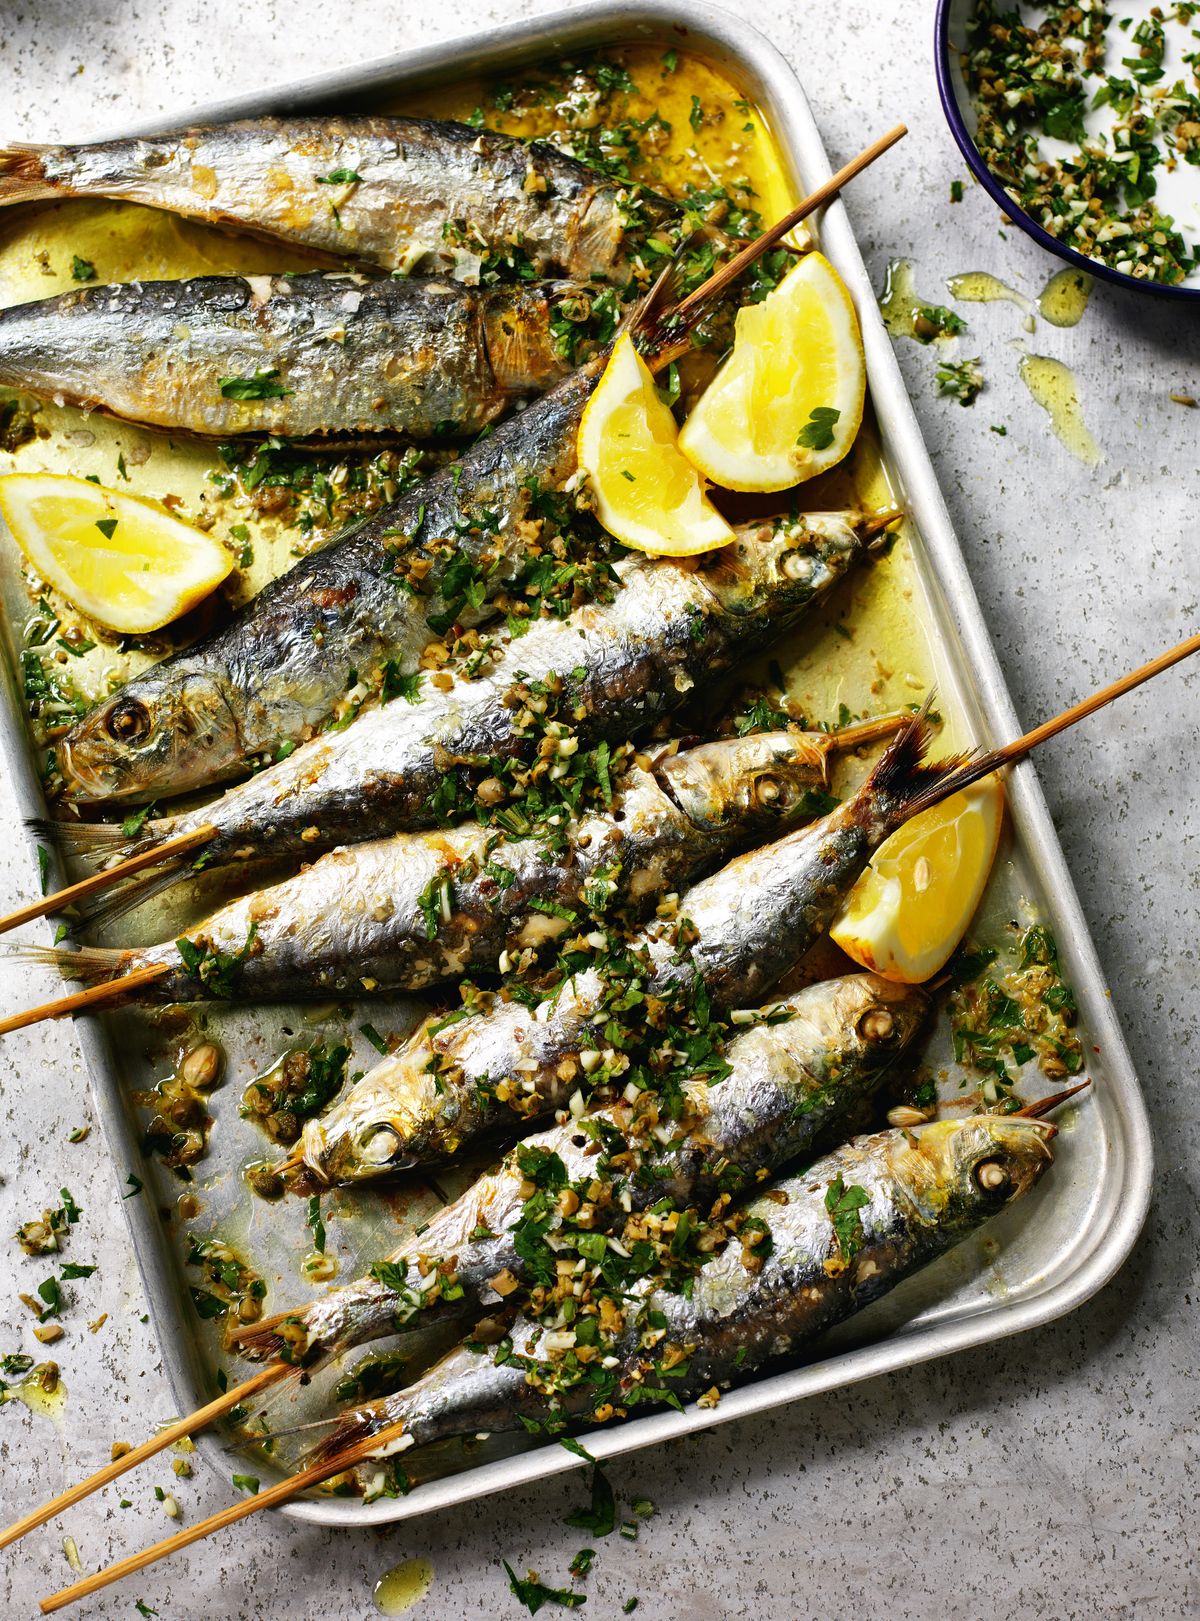 Grilled sardines with coarsely chopped green herbs